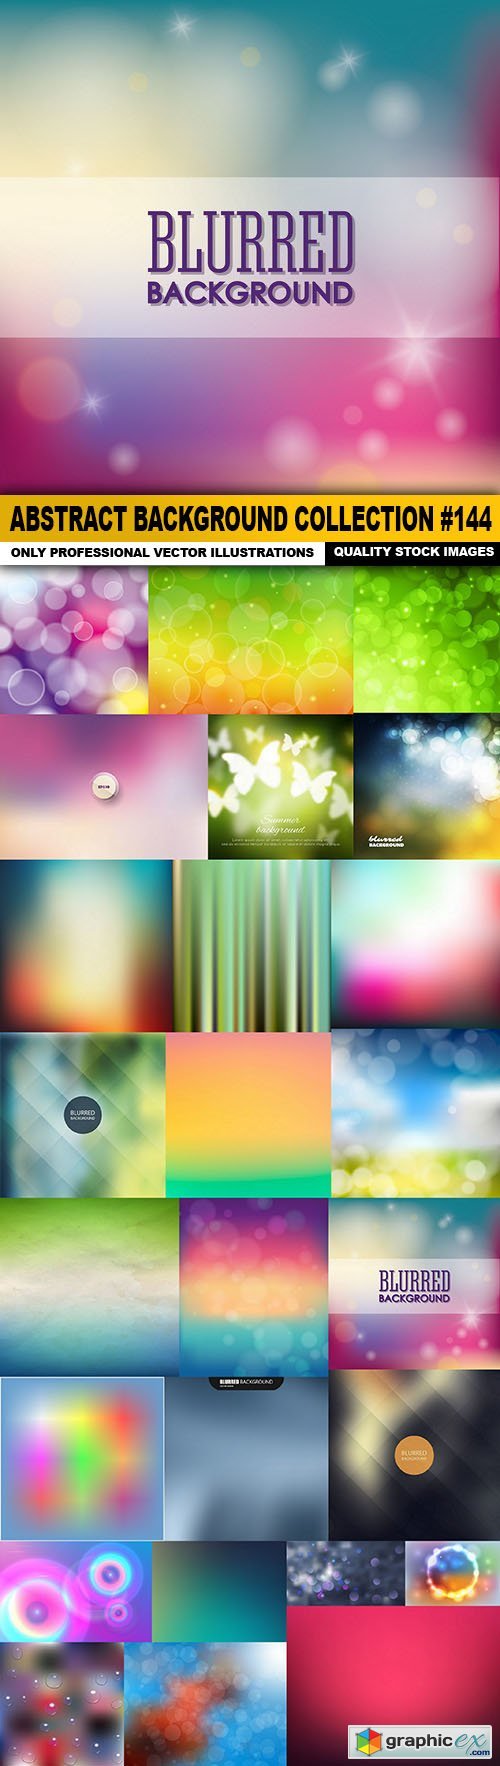 Abstract Background Collection #144